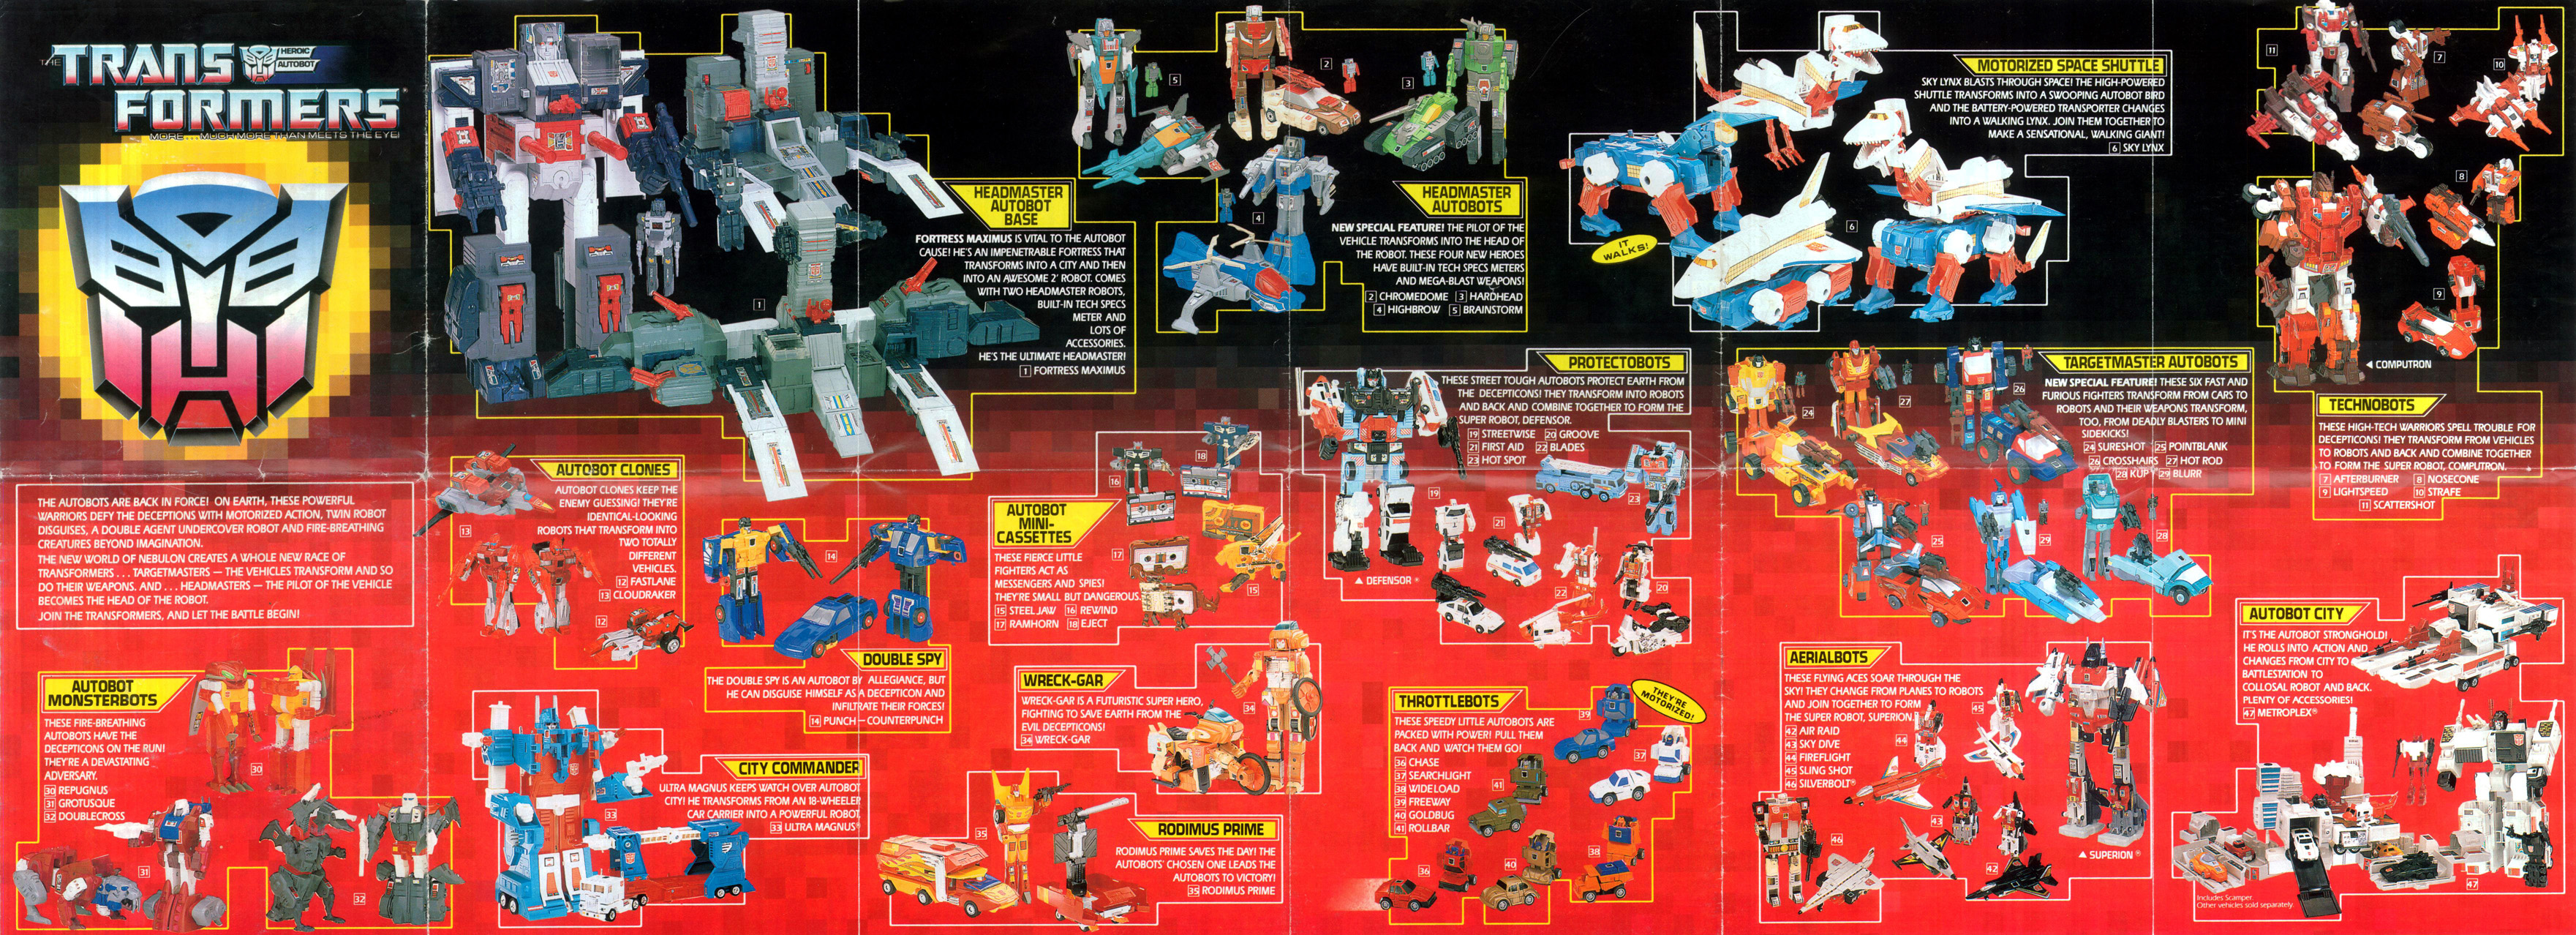 Transformers-G1-toy-catalog-1987 